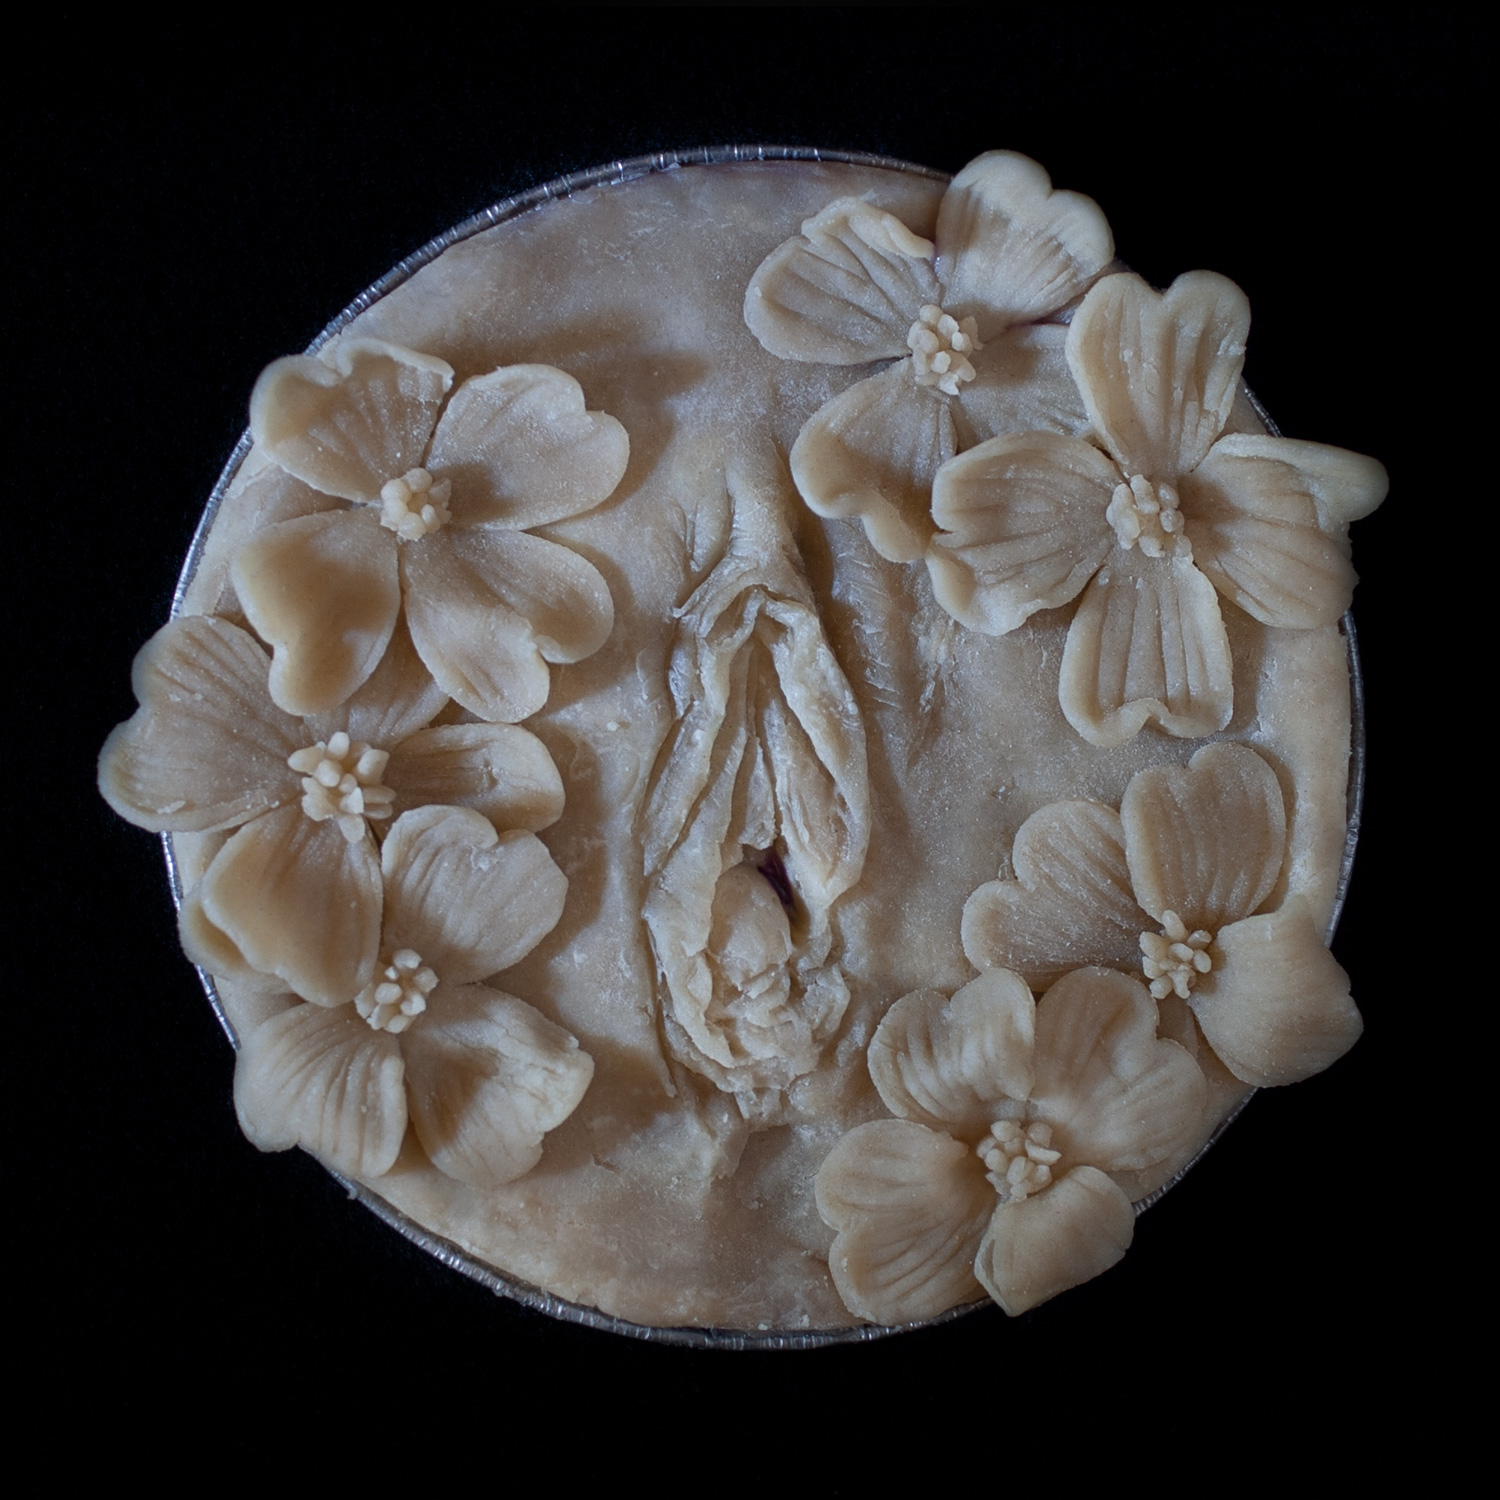 Unbaked pie on a black background. In the center of the pie is a hand sculpted pie crust vulva surrounded by dogwood flowers made of pie dough.